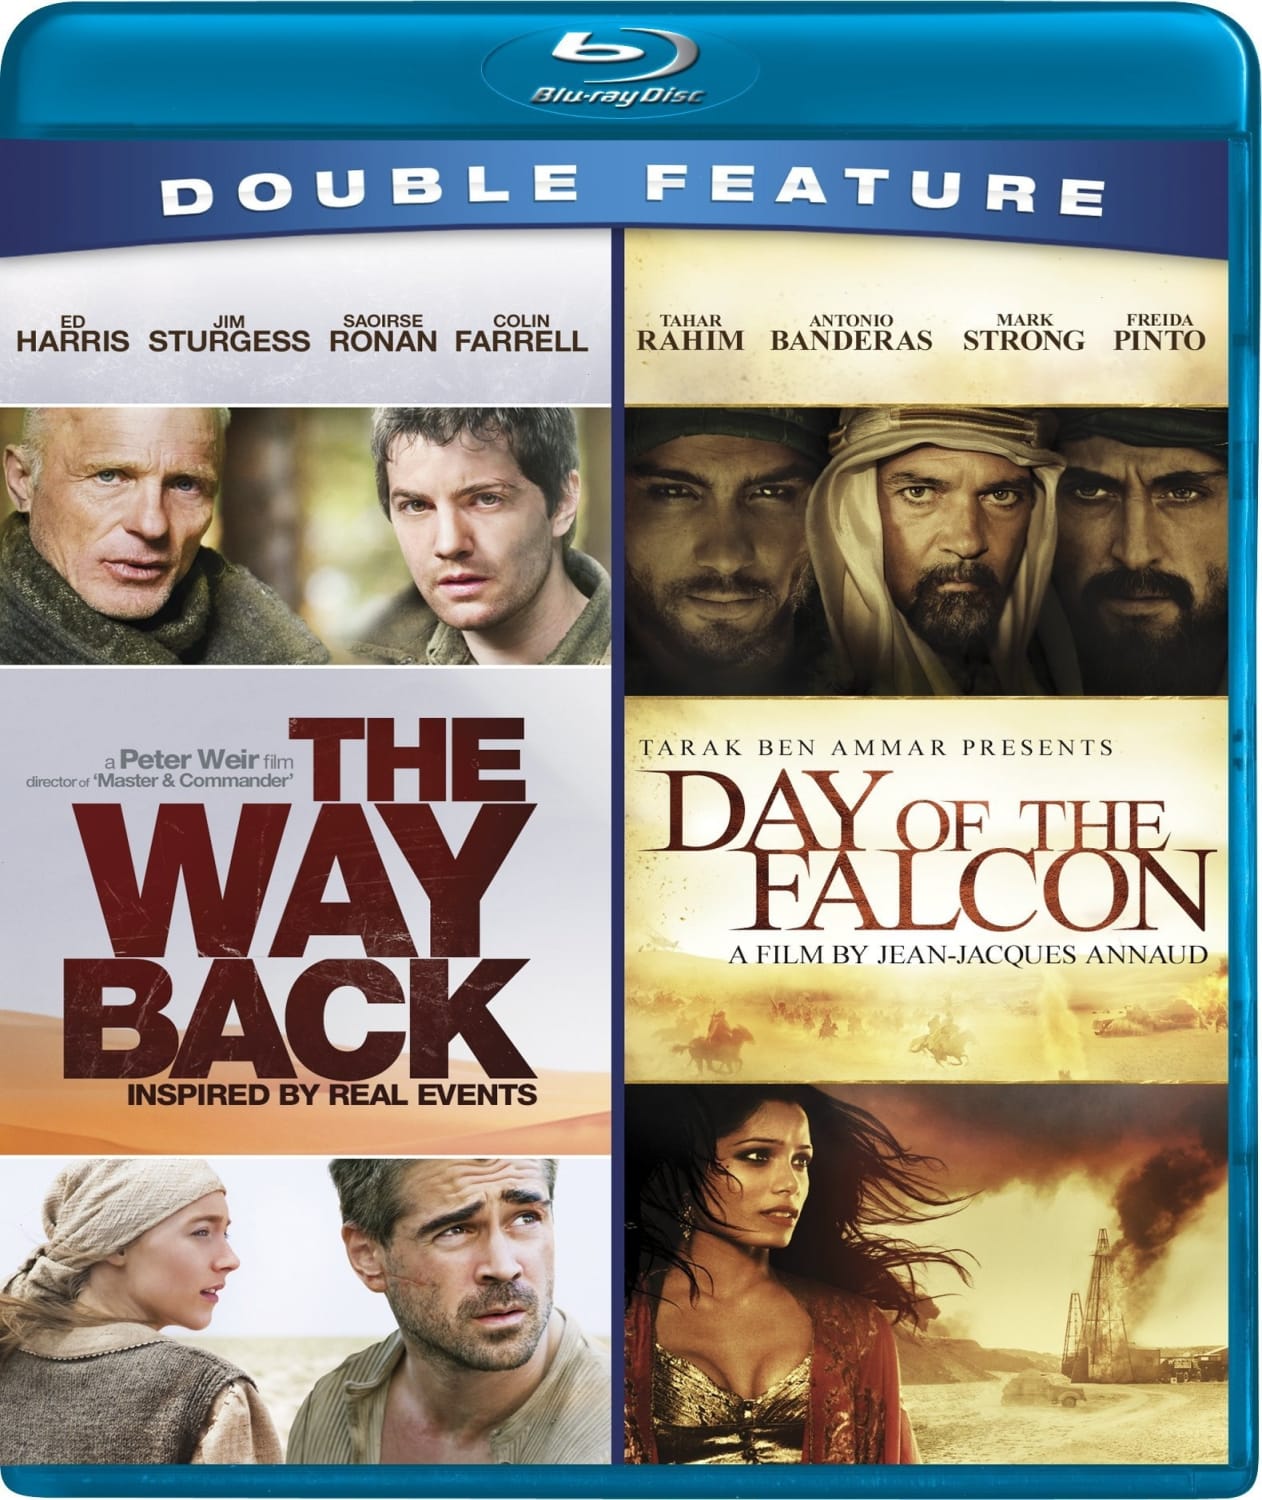 The Way Back / Day of the Falcon (Blu-ray) on MovieShack